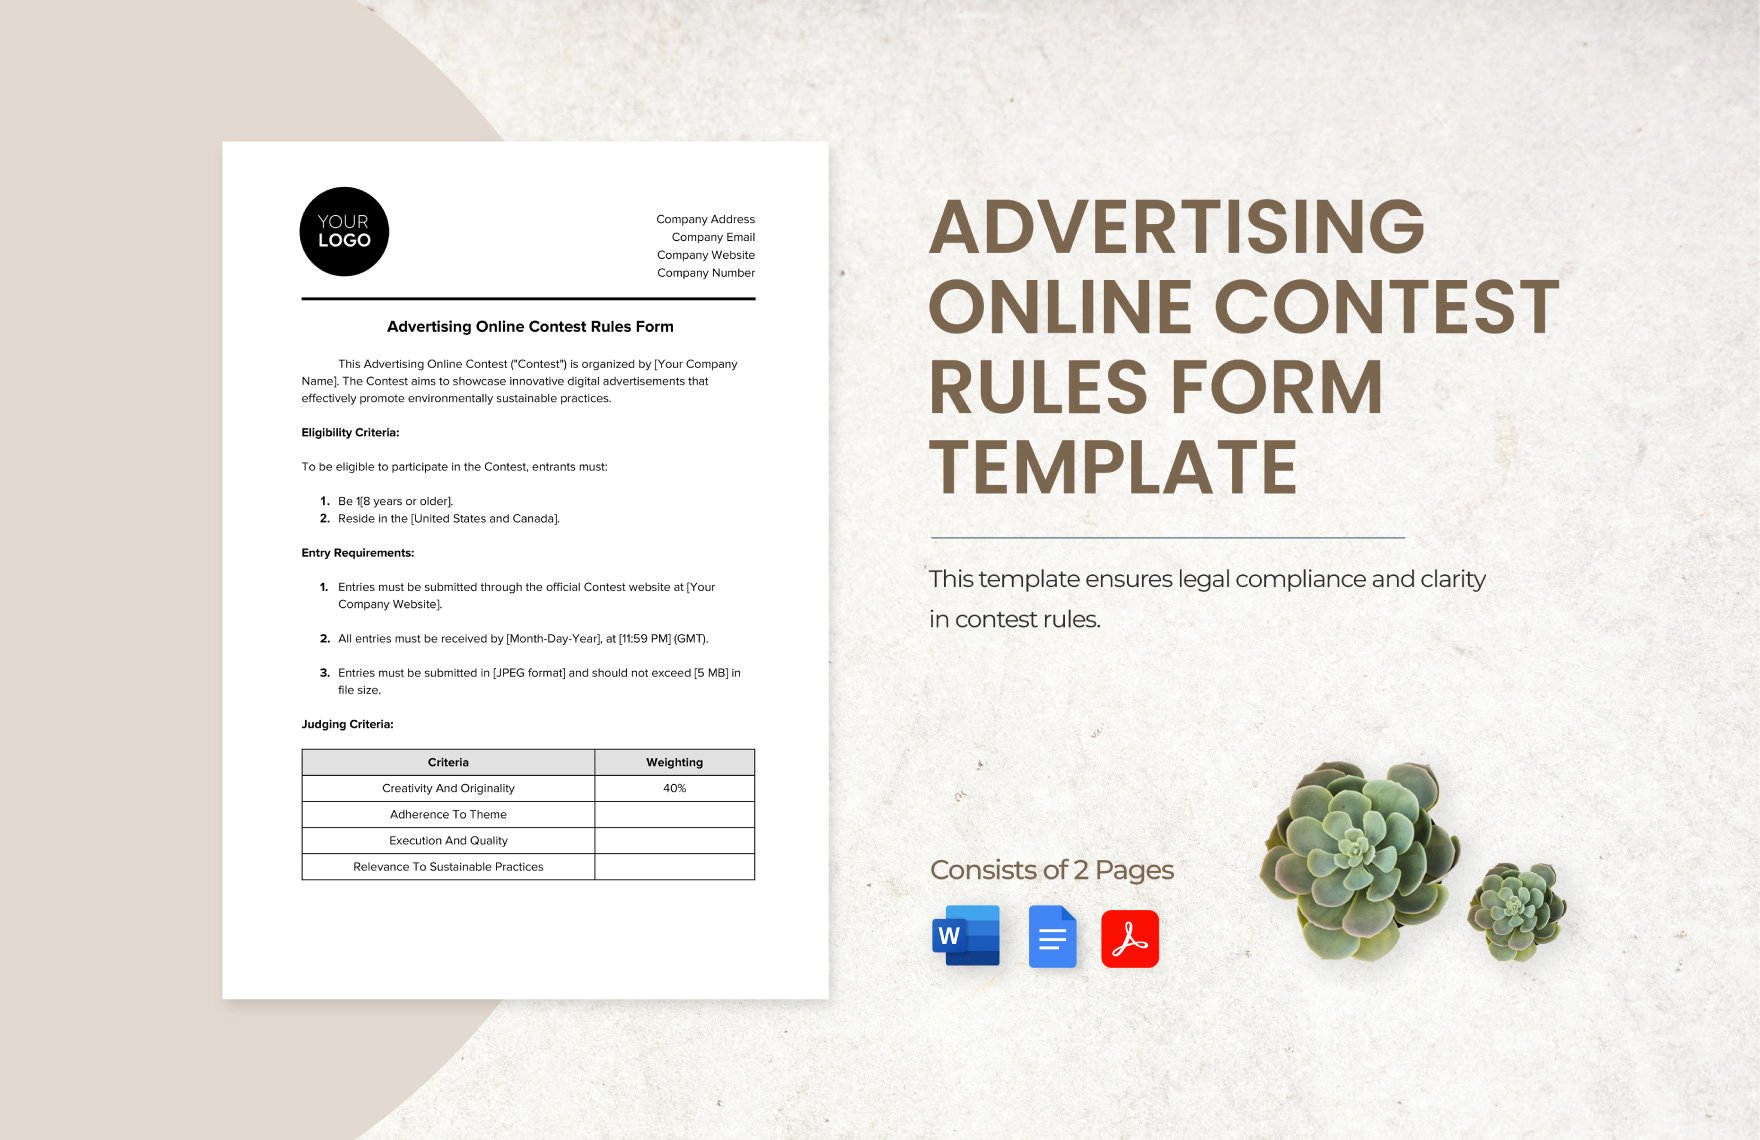 Advertising Online Contest Rules Form Template in Word, PDF, Google Docs -  Download